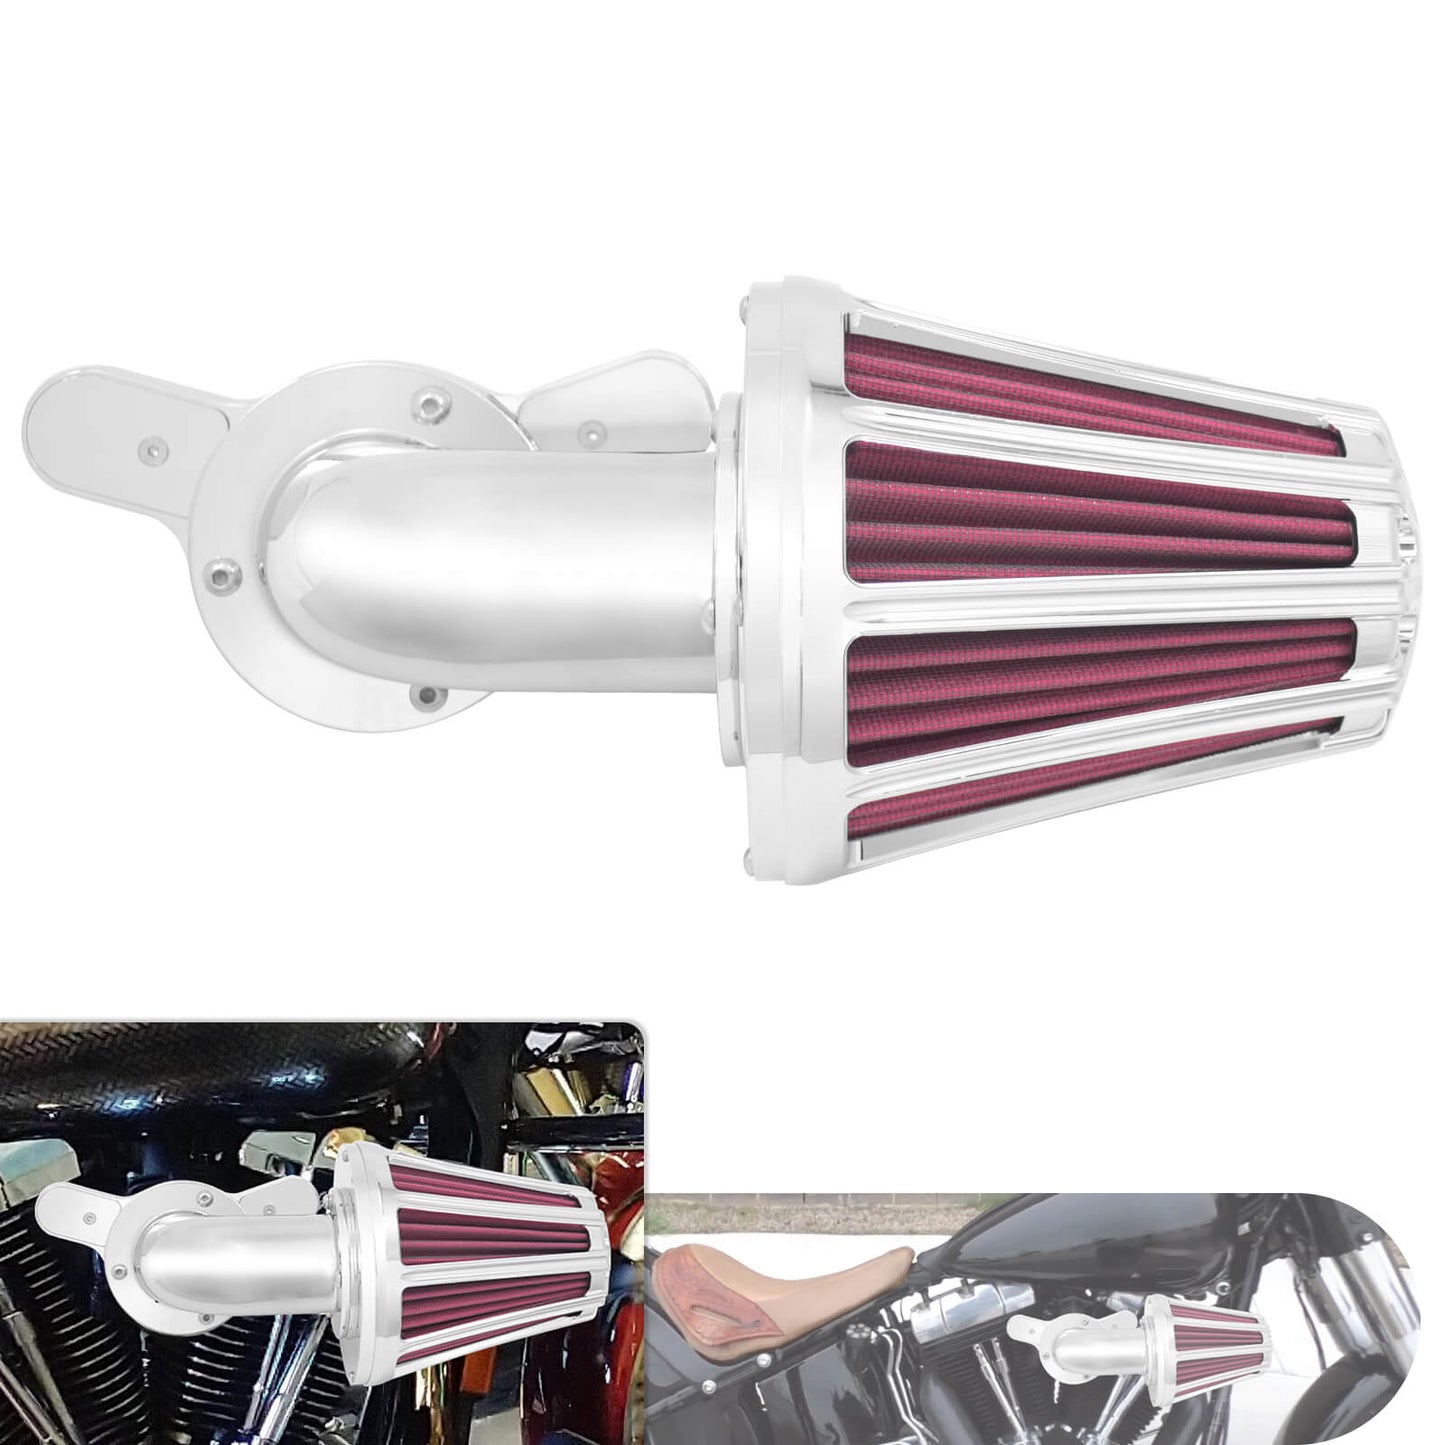 Mactions Air Filter Kit for Harley Dyna, Softail, and Touring Models